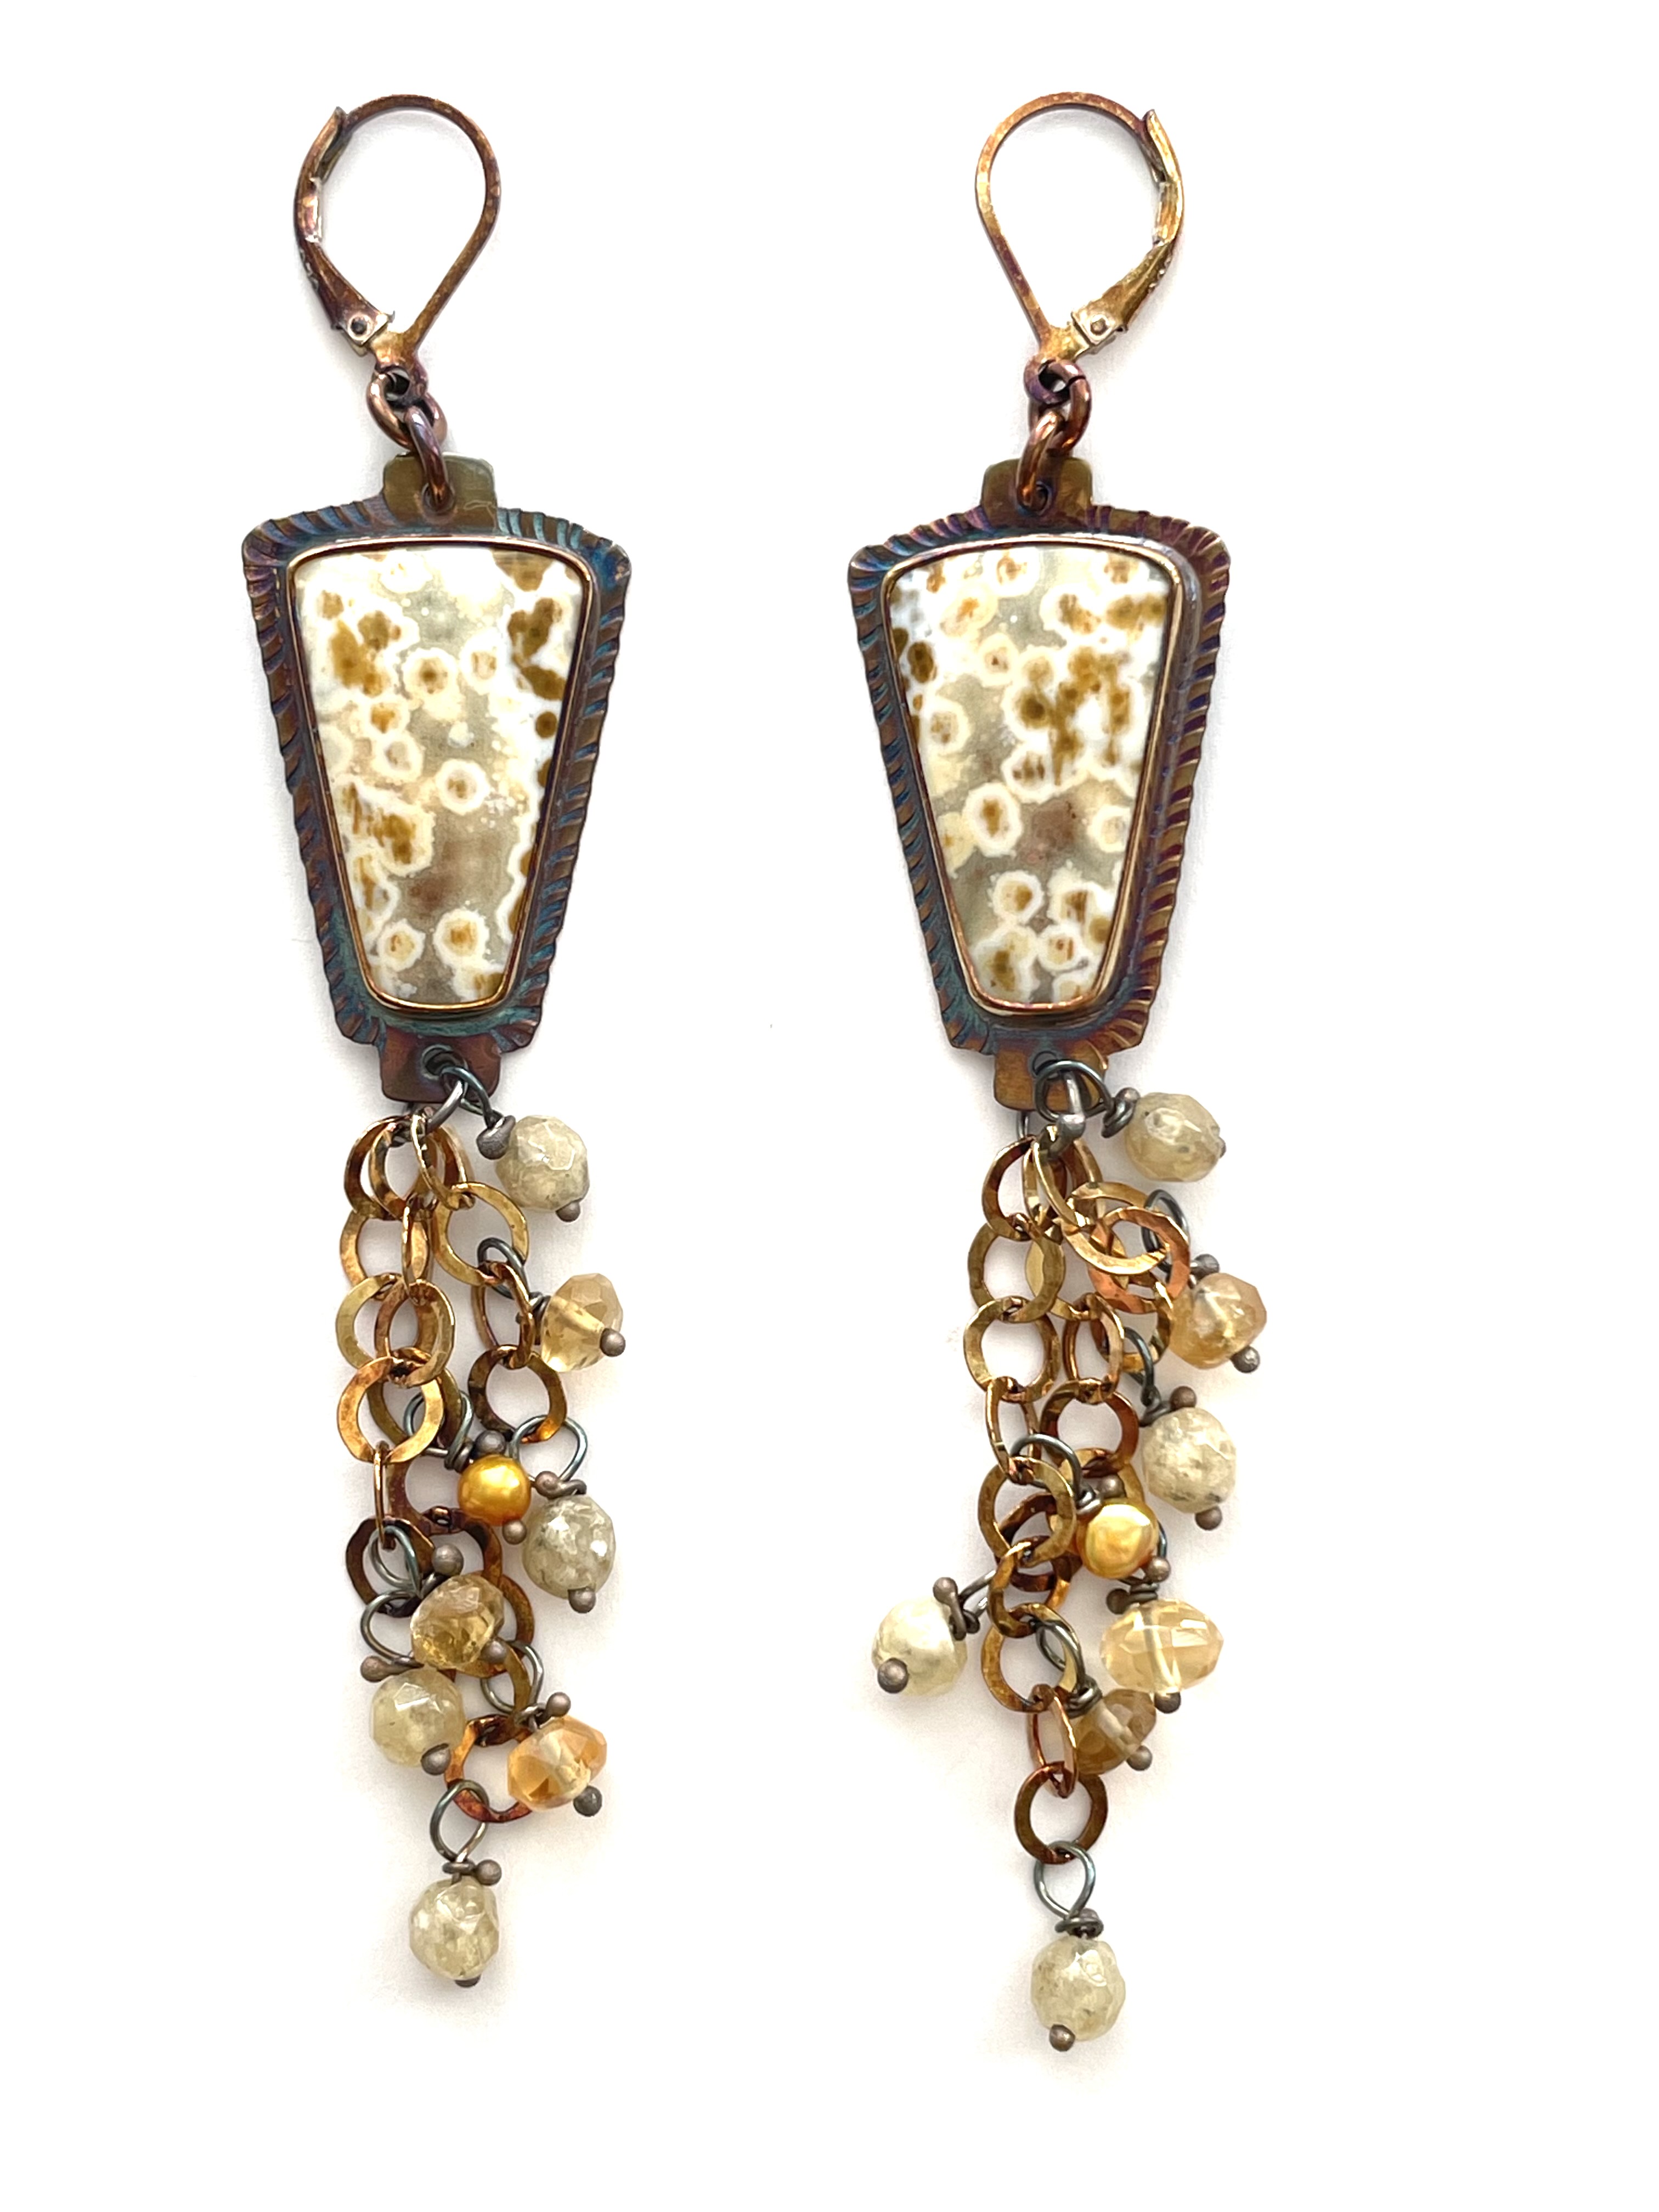 Sterling Silver and Orbicular Jasper Earrings with Citrine and Rutilated Quartz Beads